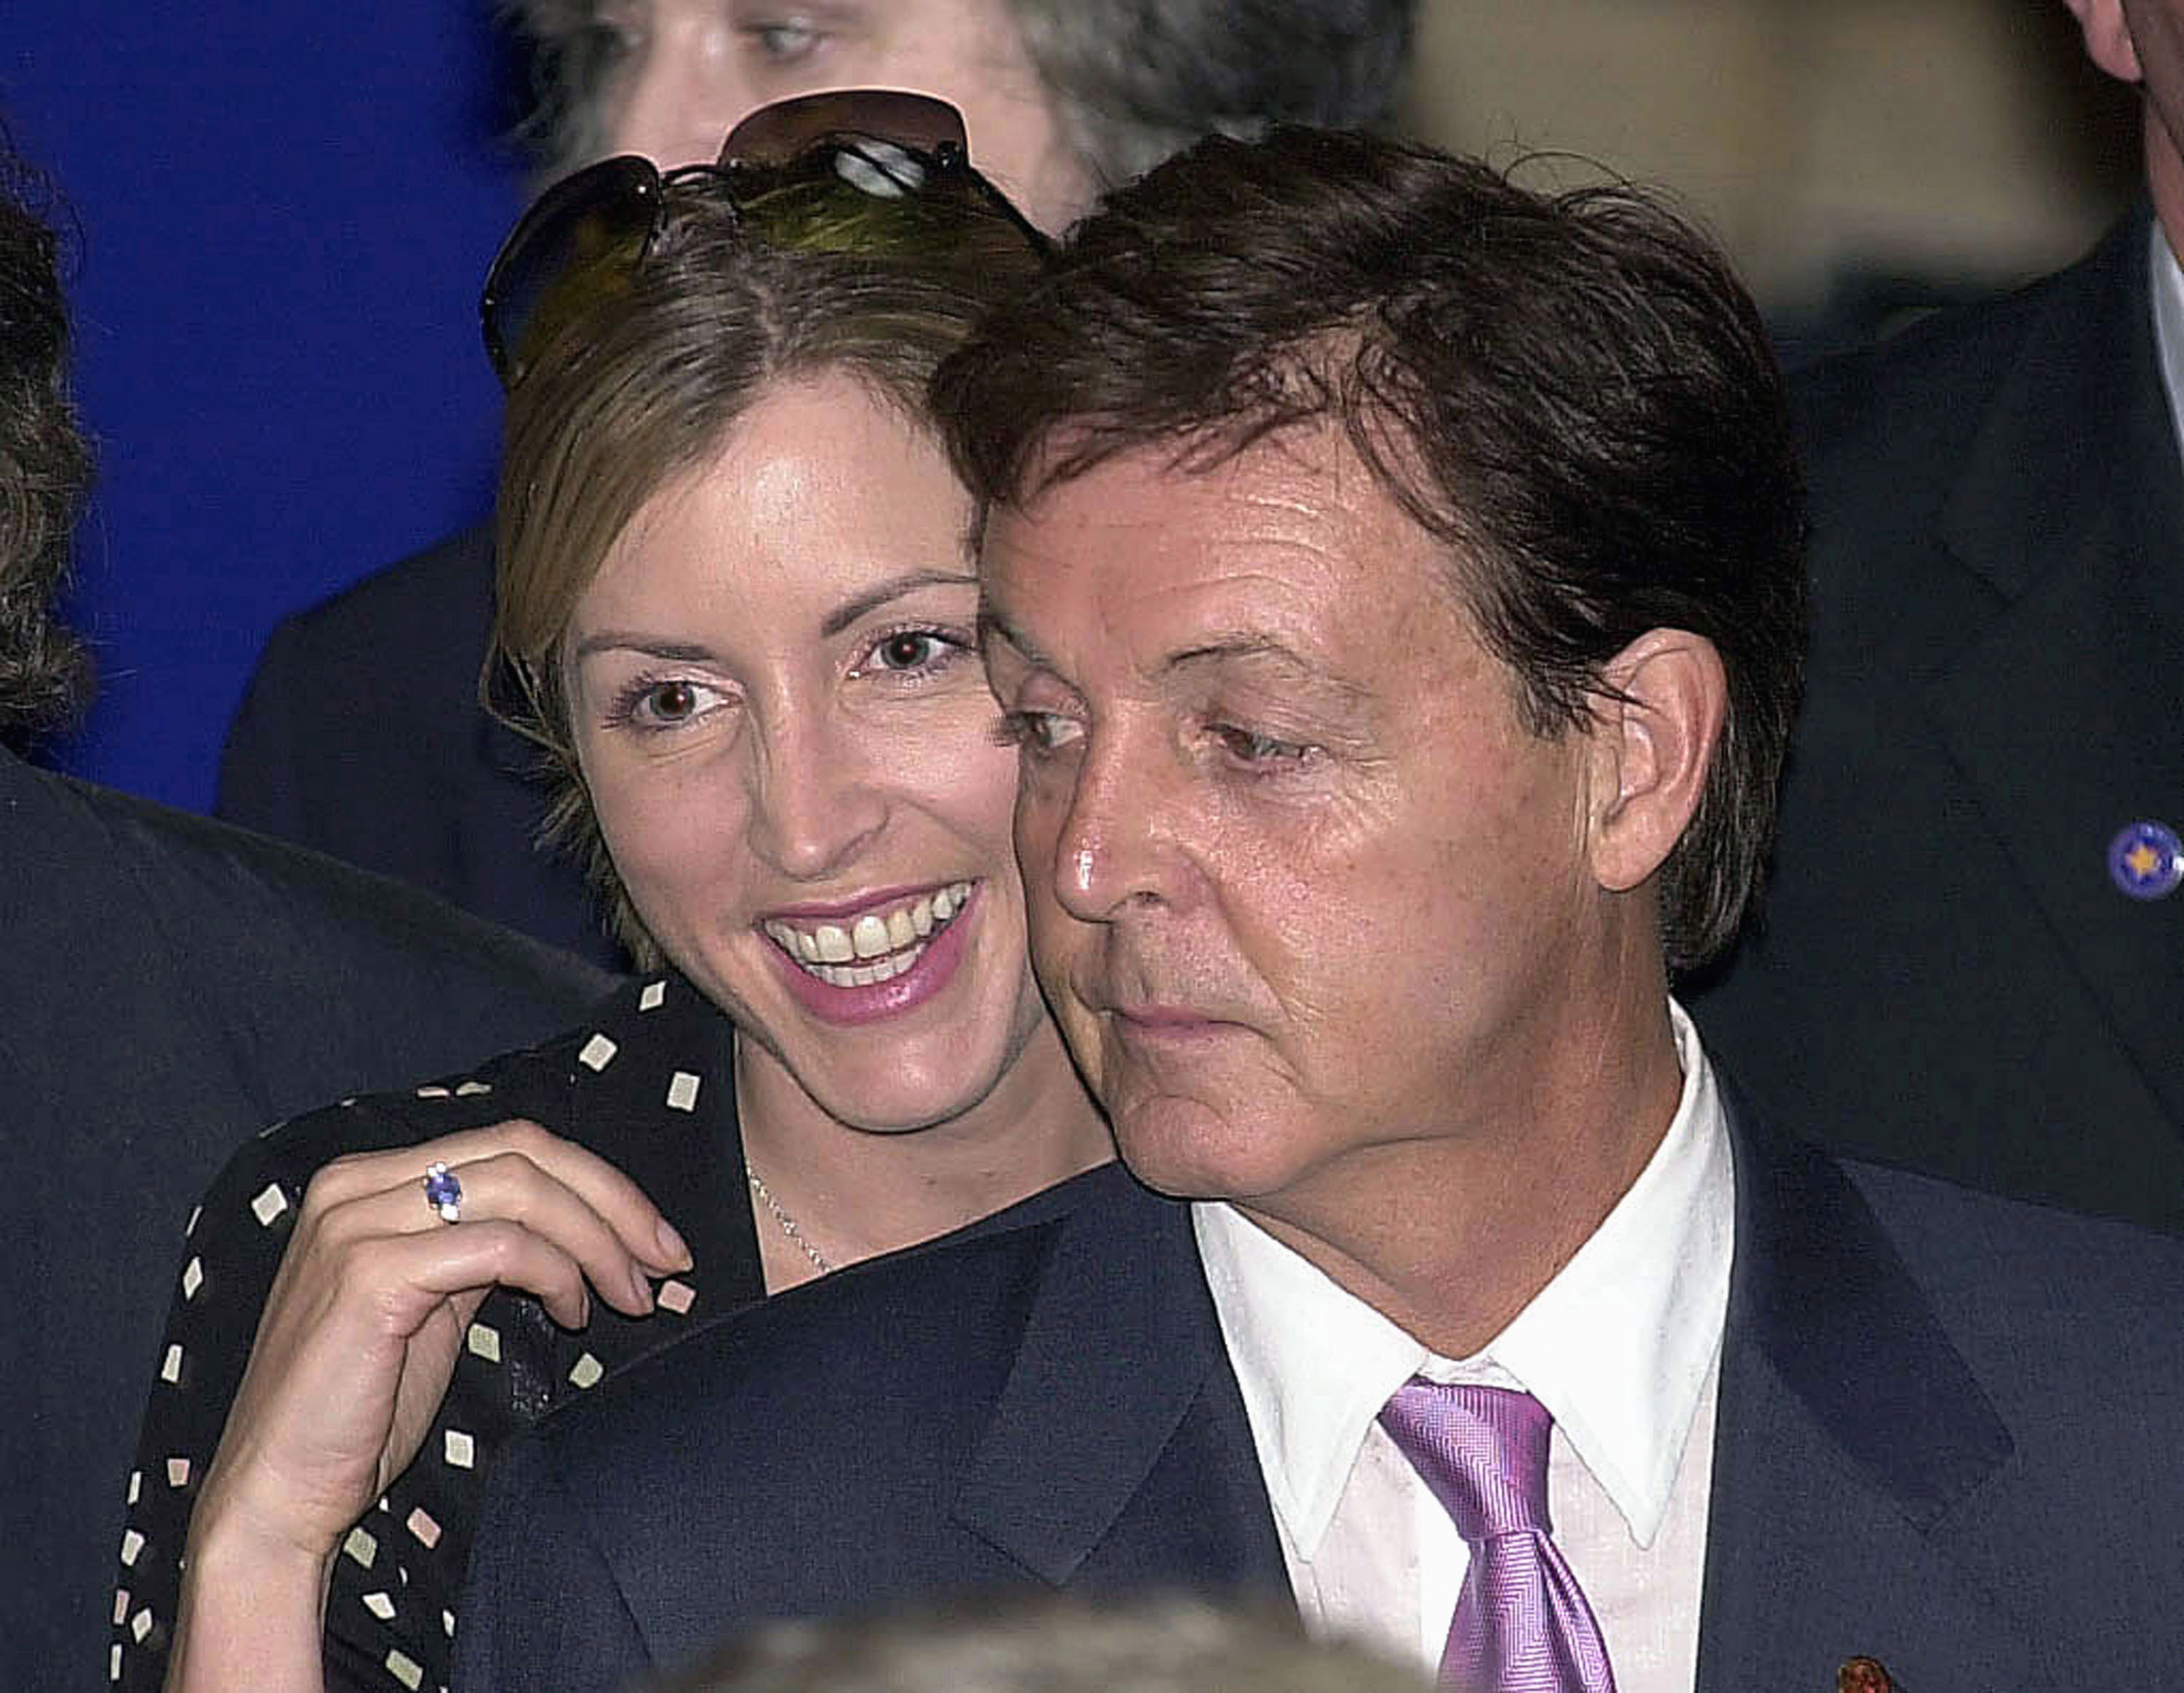 Paul McCartney and Heather Mills attend an art exhibition at the Walker Art Gallery on July 25, 2002 in Liverpoool, England | Source: Getty Images